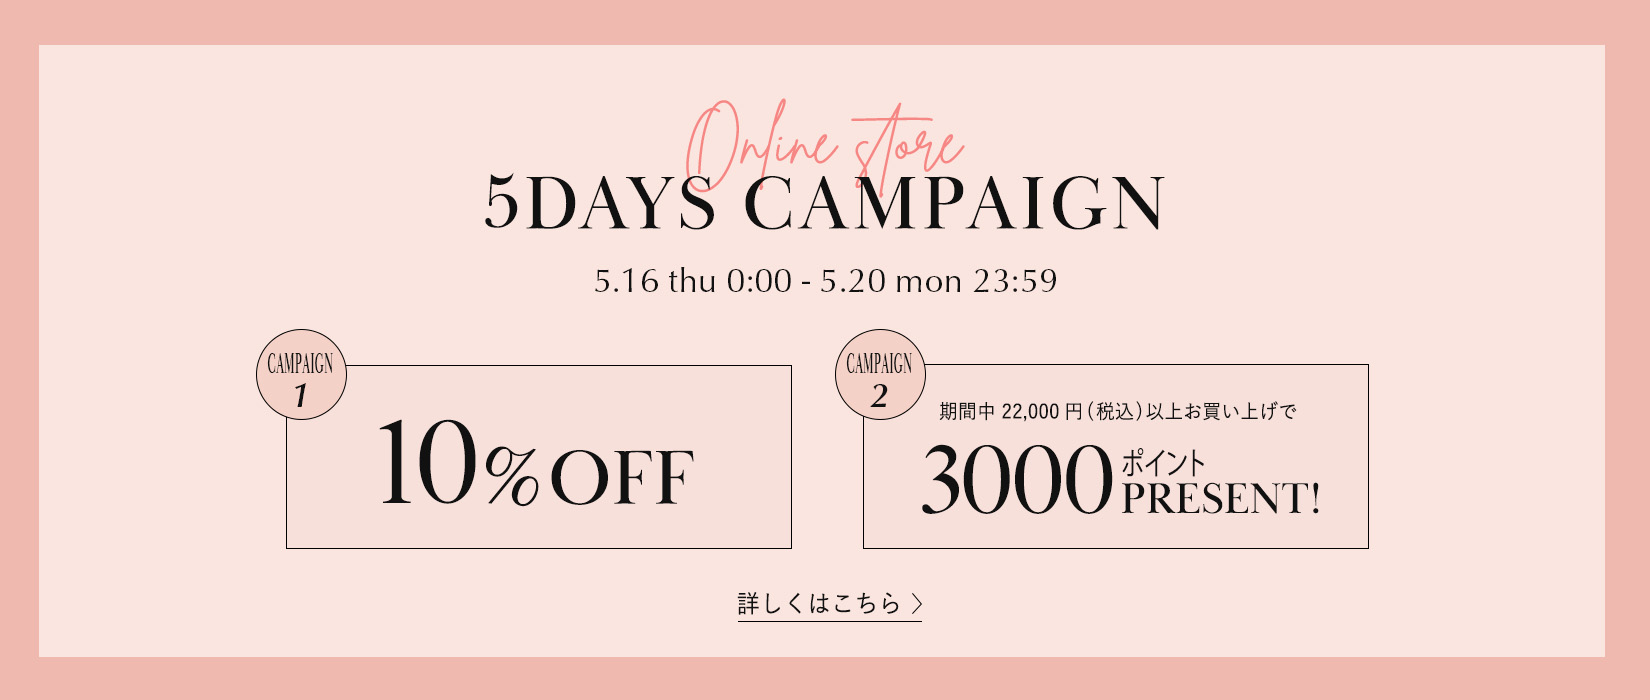 Online Store 5DAYS CAMPAIGN